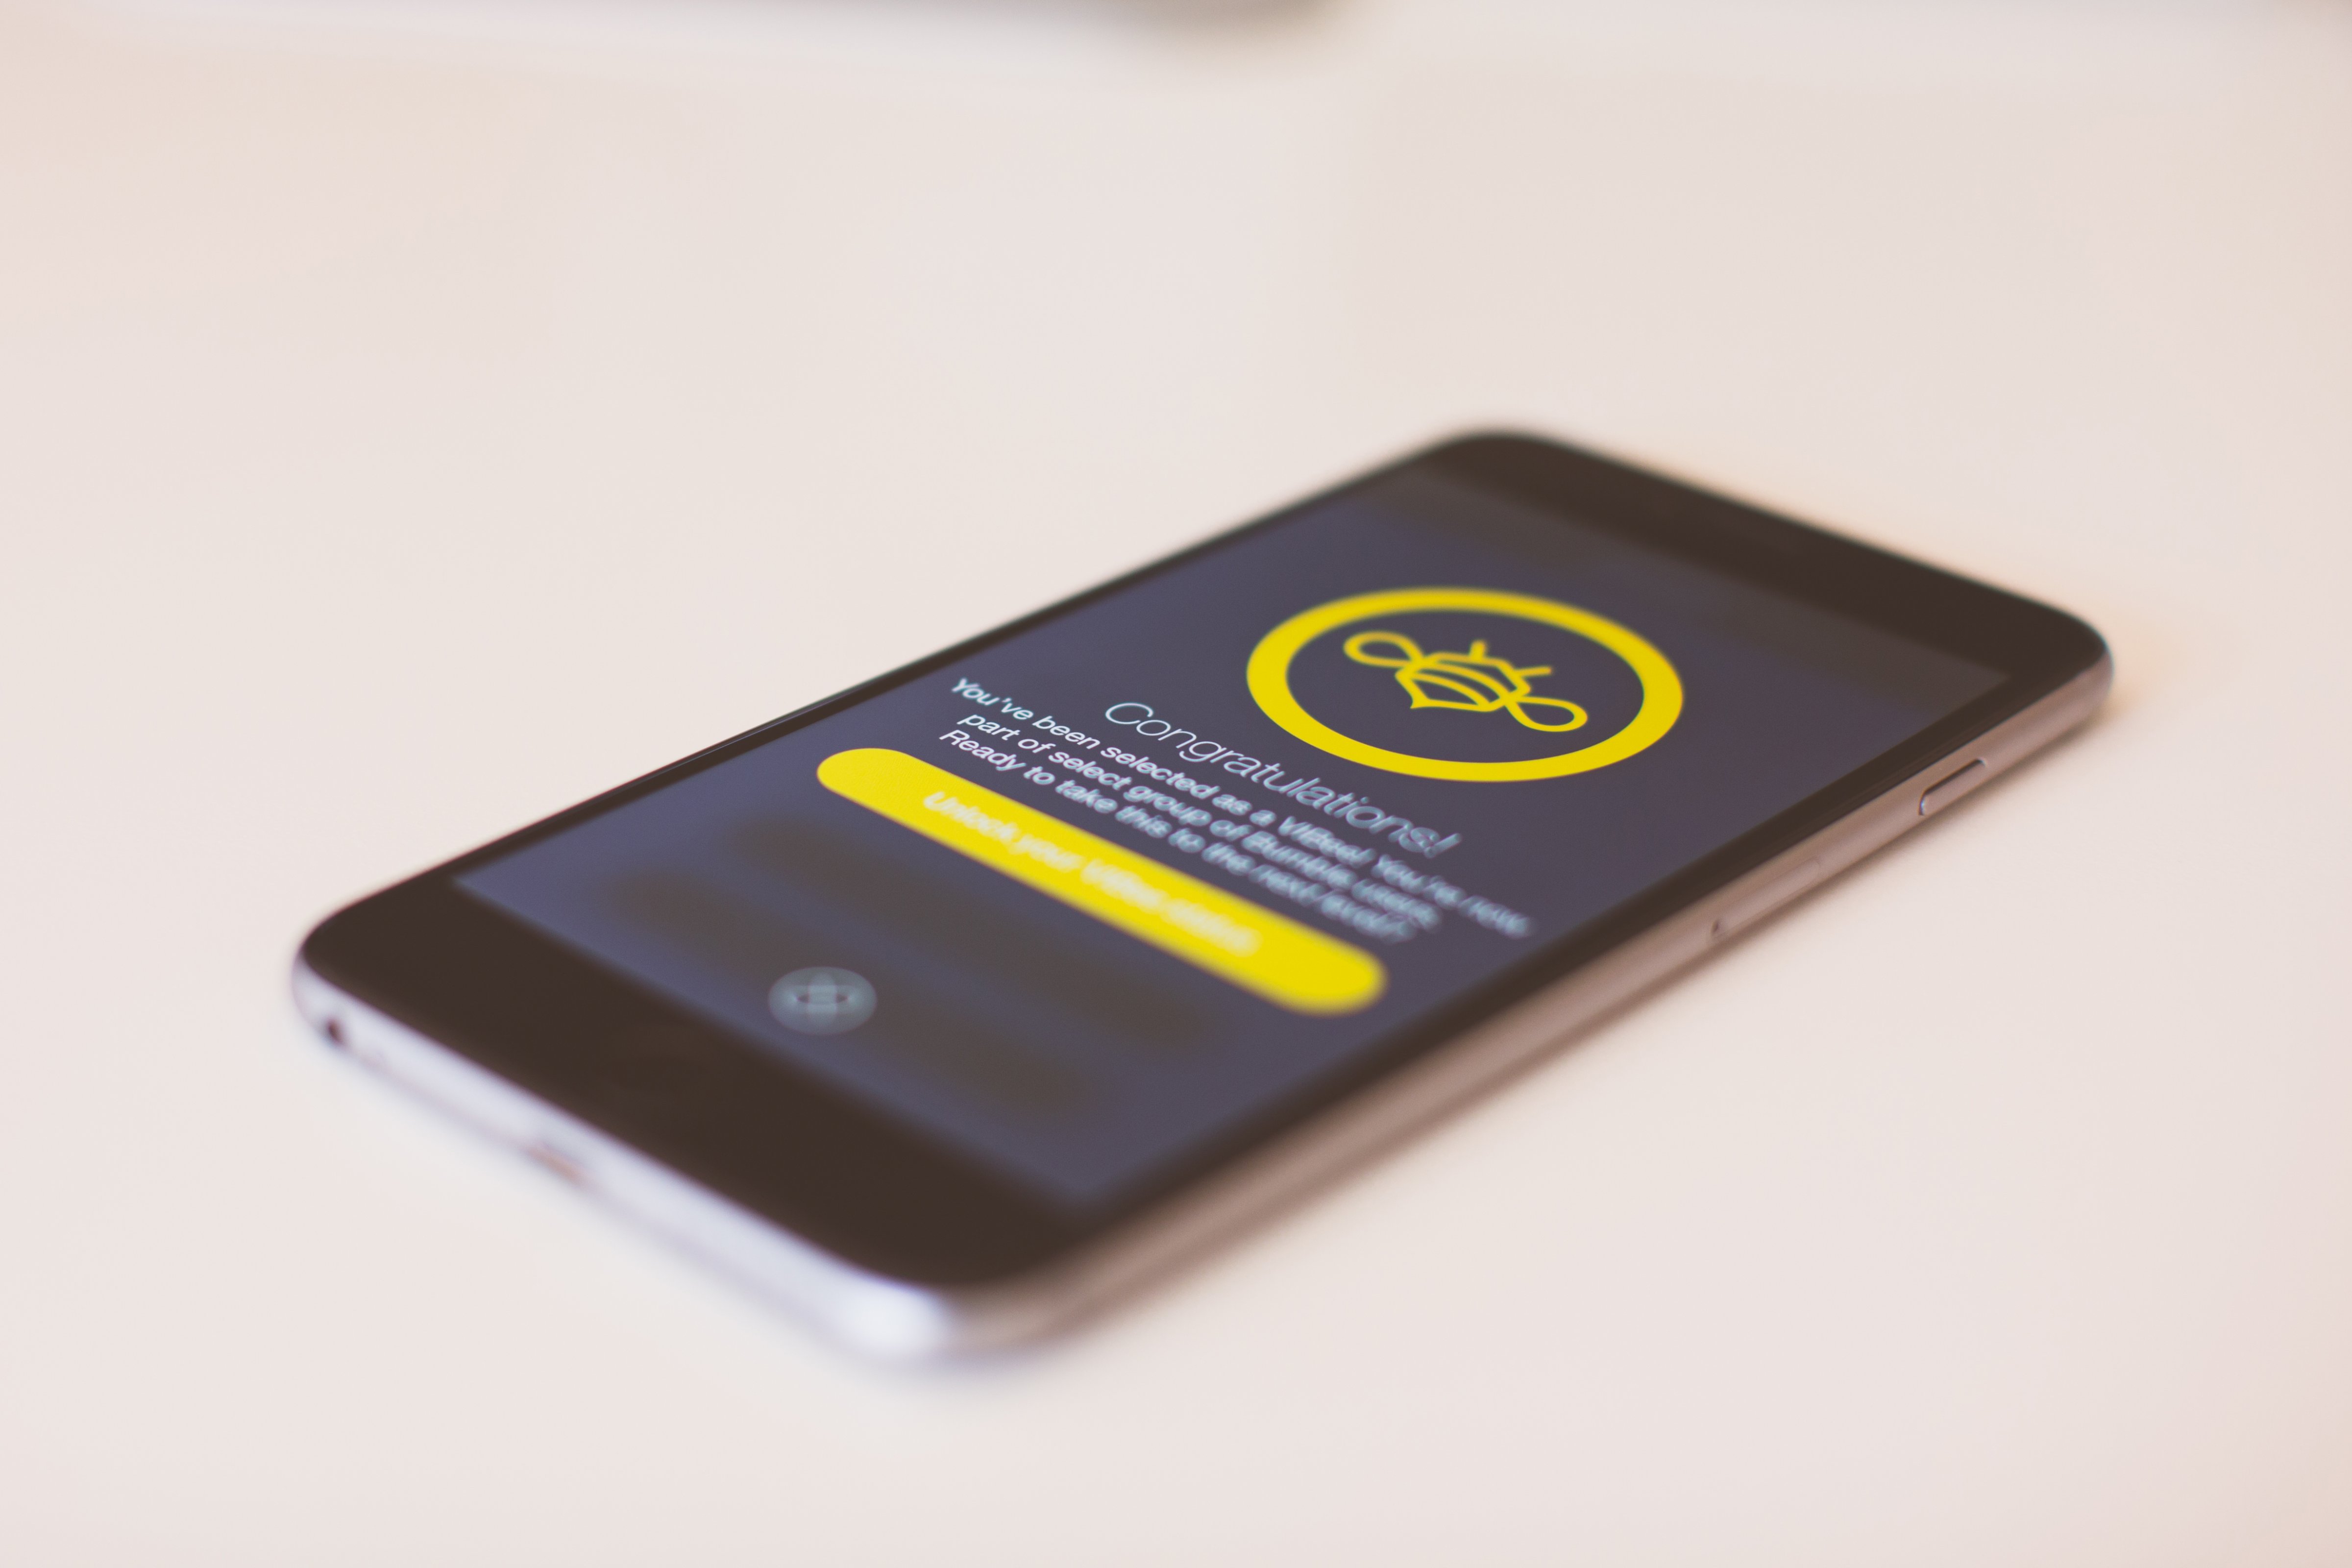 Bumble's VIBee status could allow users to weed out jerks (Photo courtesy of Sarah Mick)